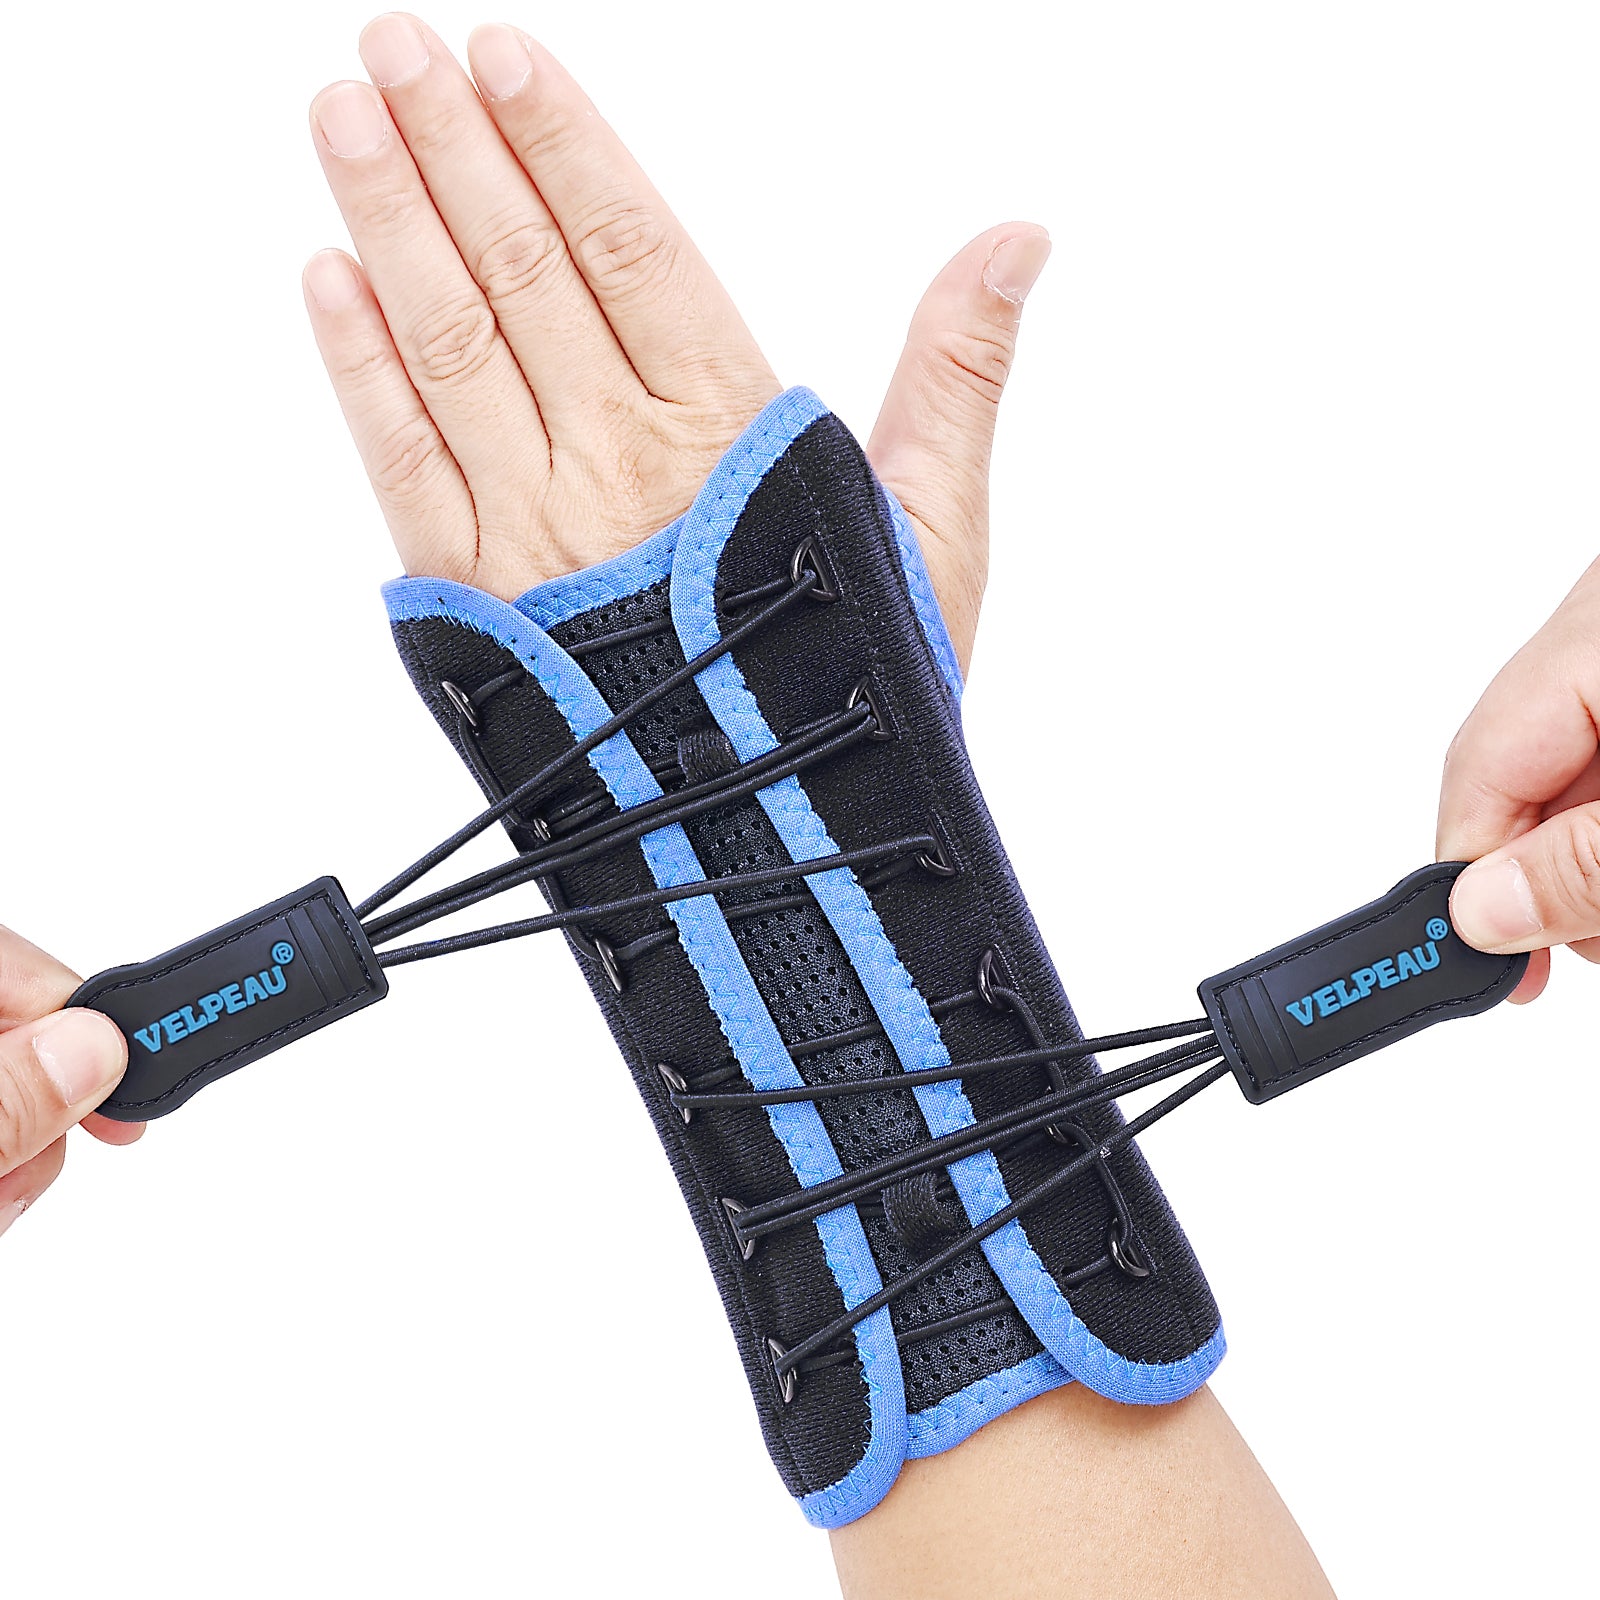 VELPEAU Elastic Thumb Support Brace Layer (Pair) - Soft Thumb Compression  Sleeve Protector for Relieving Pain, Arthritis, Joint Pain, Tendonitis,  Sprains, Sports